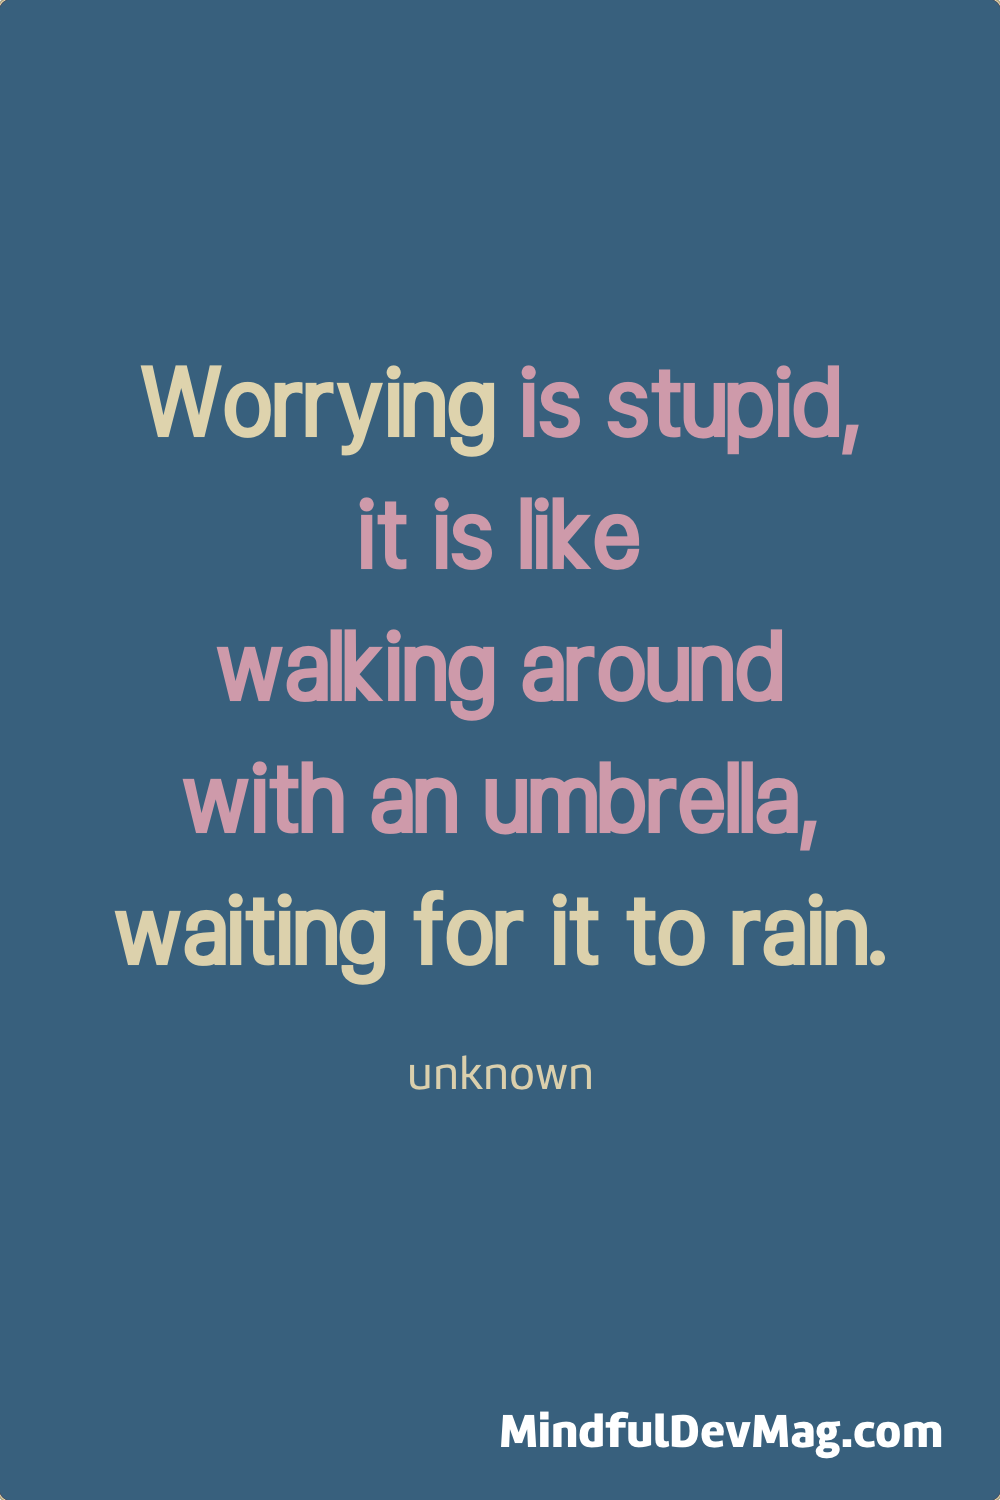 Mindful quote: Worrying is stupid, it is like walking around with an umbrella, waiting for it to rain. - unknown